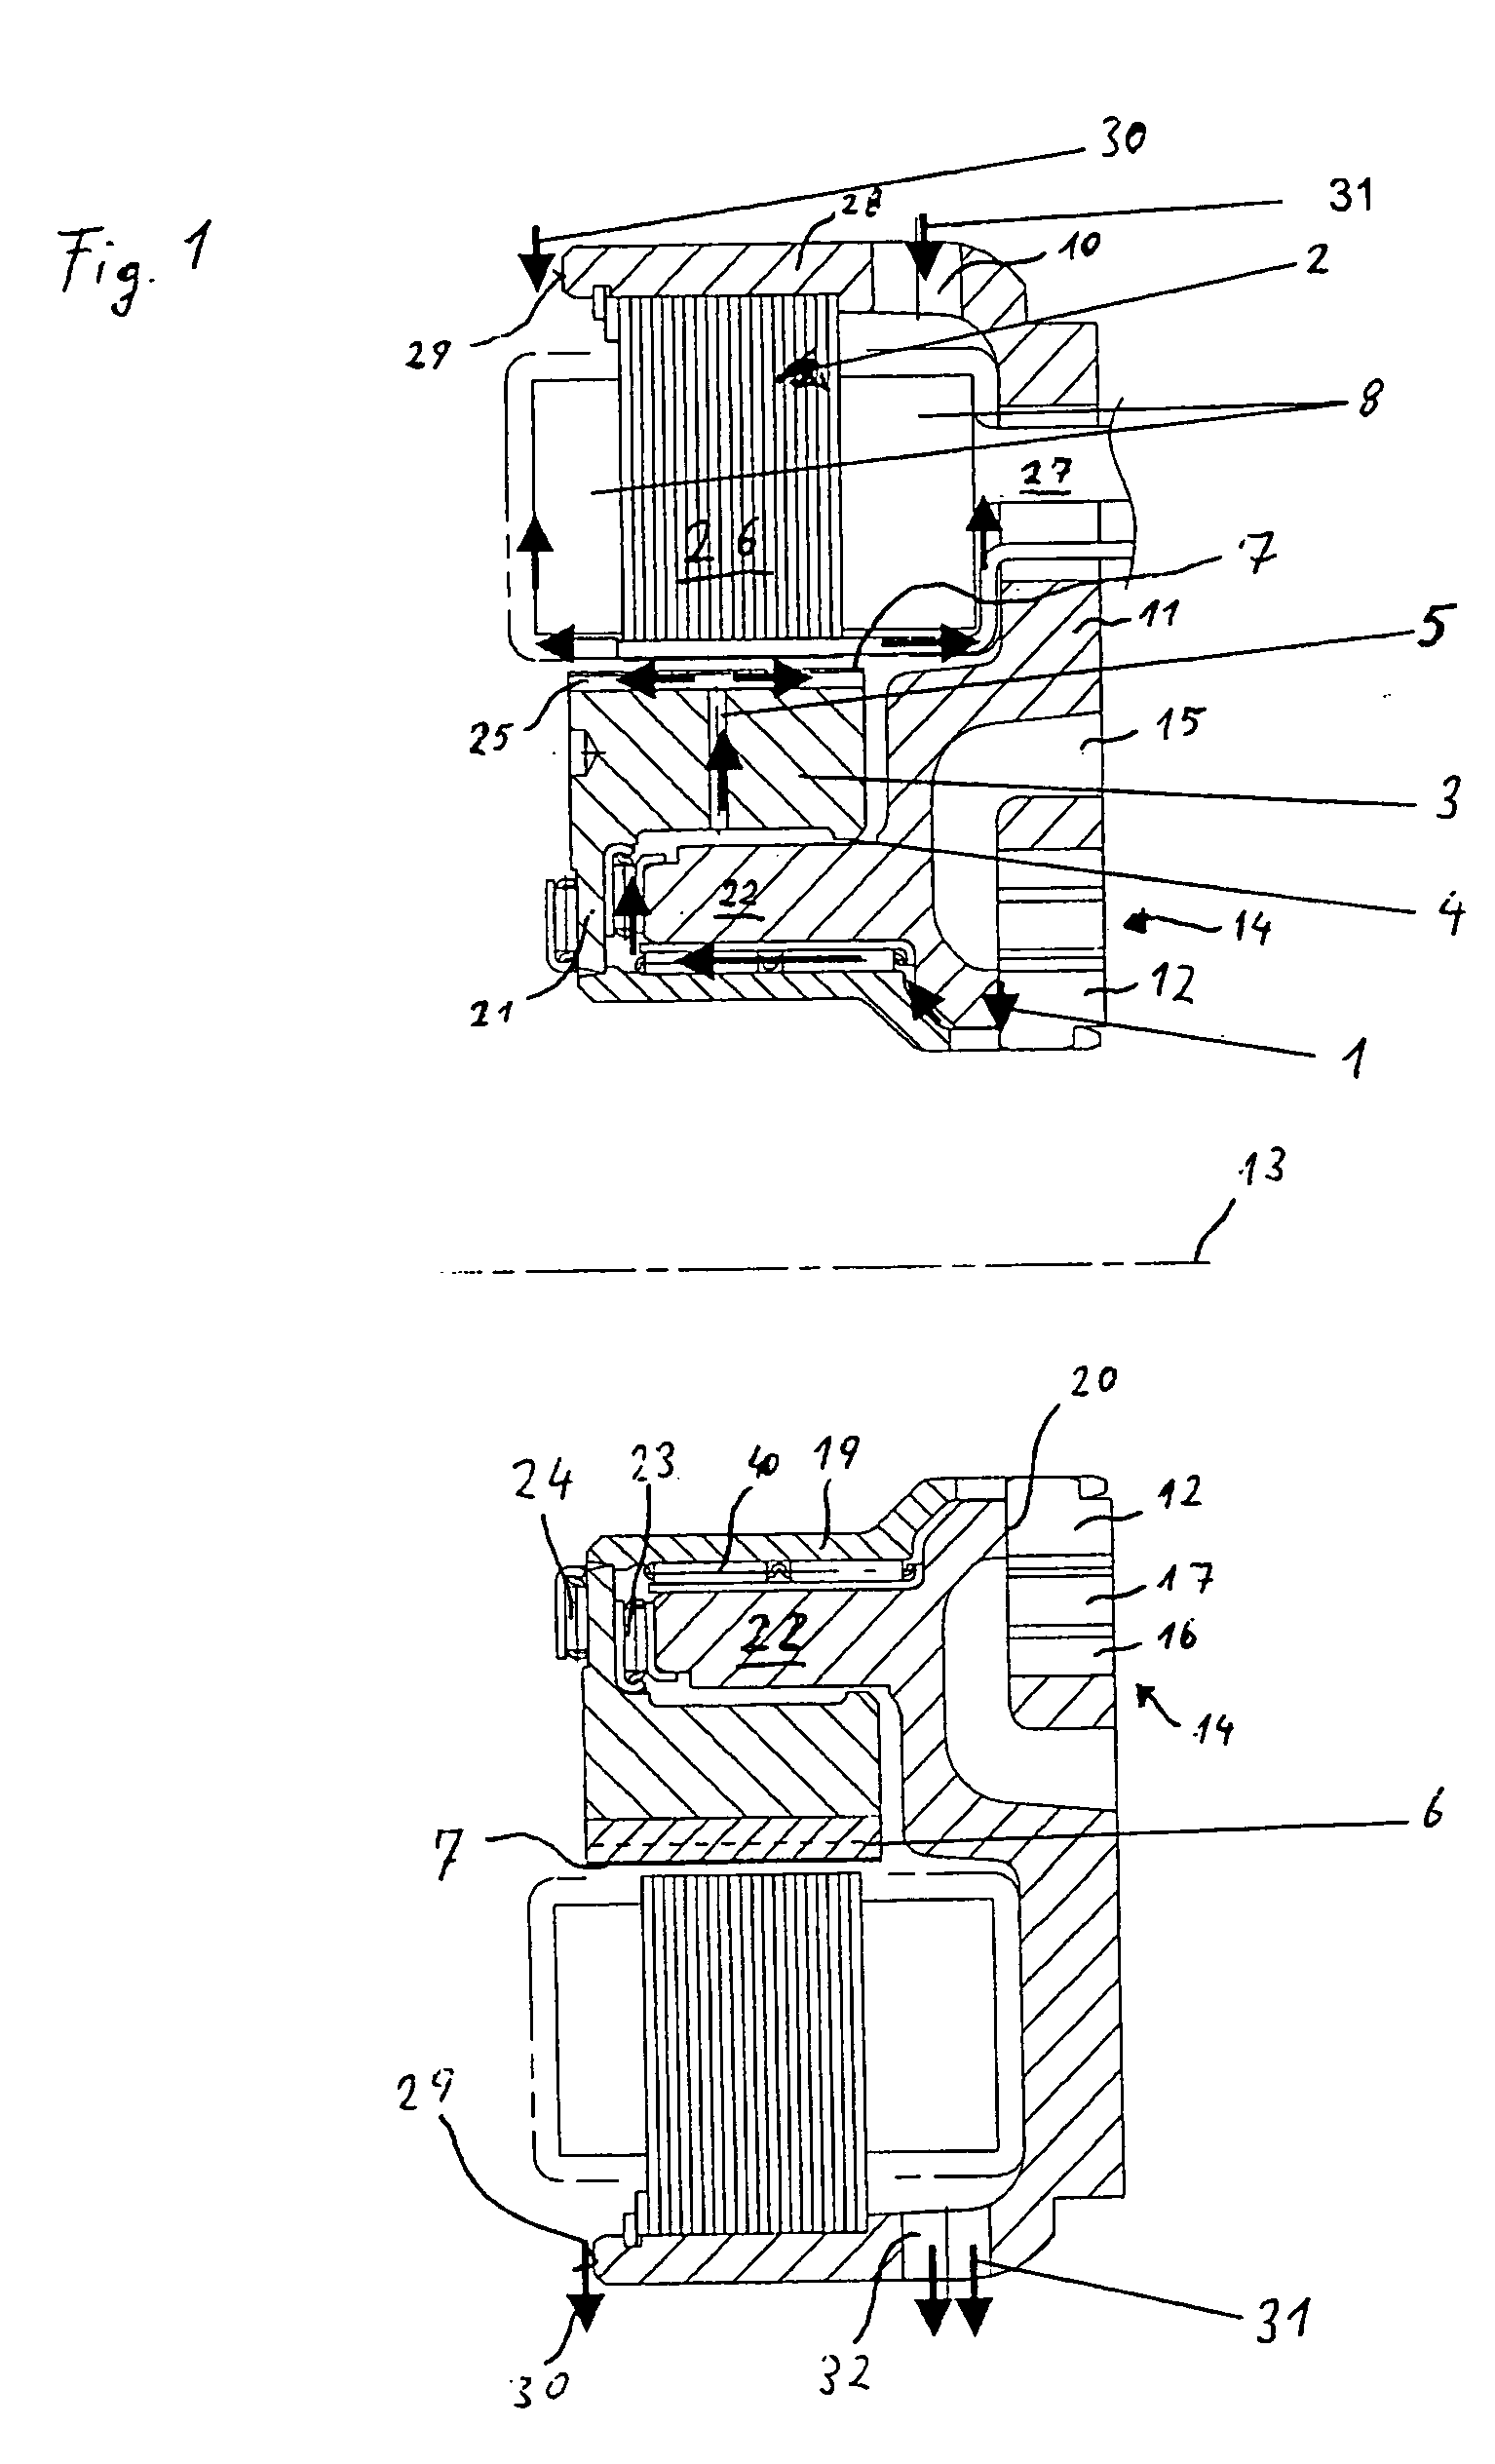 Oil pump that can be driven by means of an electric motor